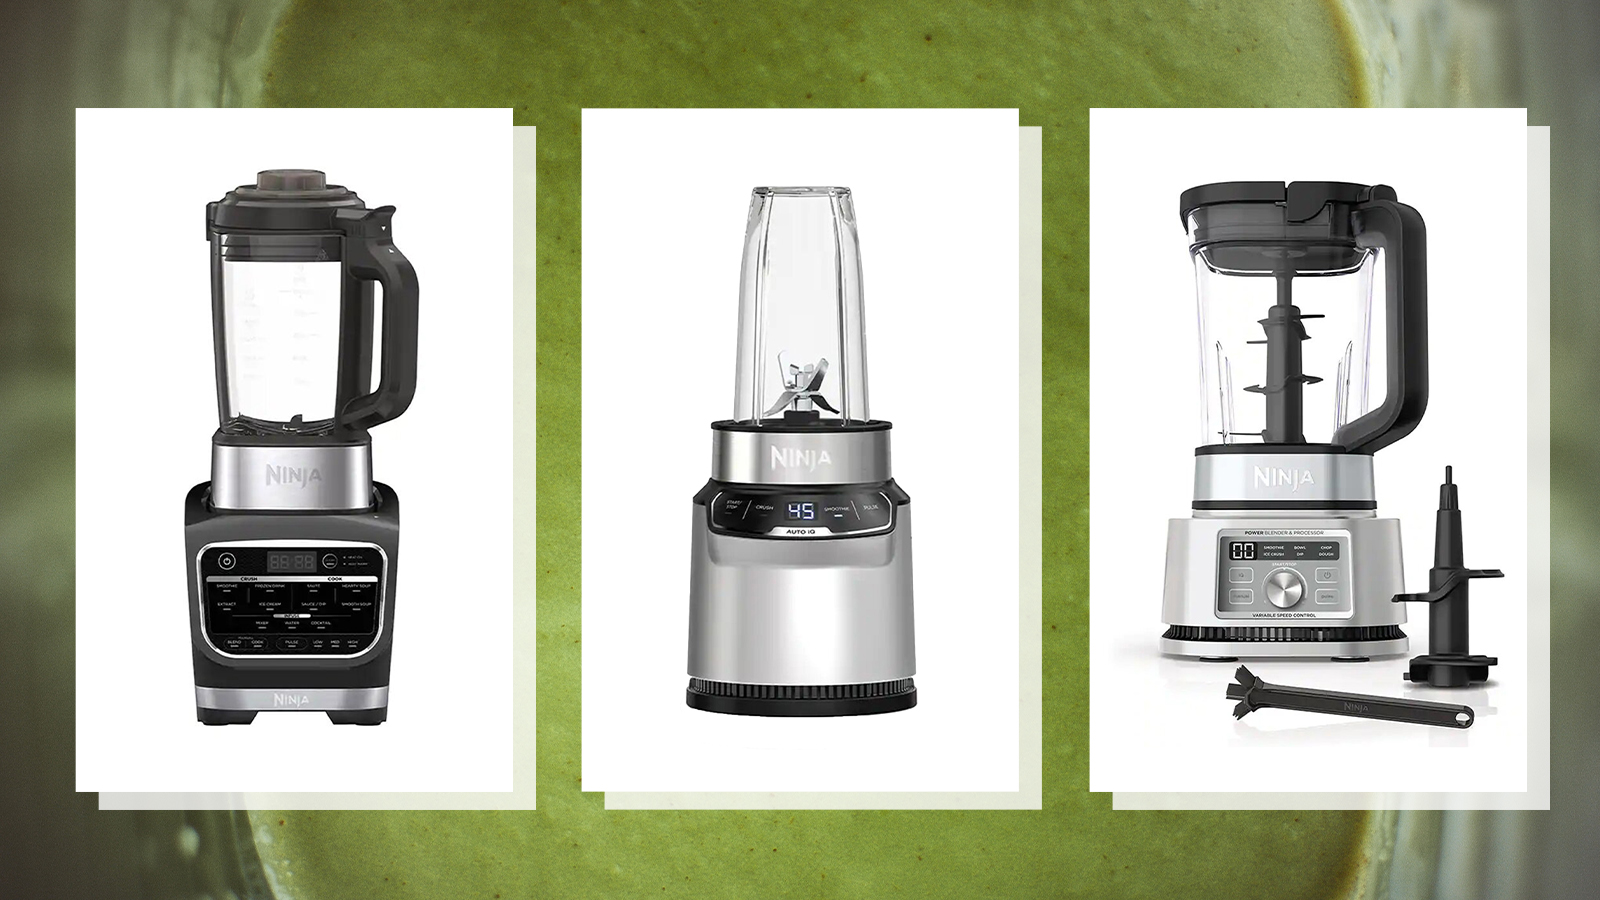 This Ninja blending system is on sale at